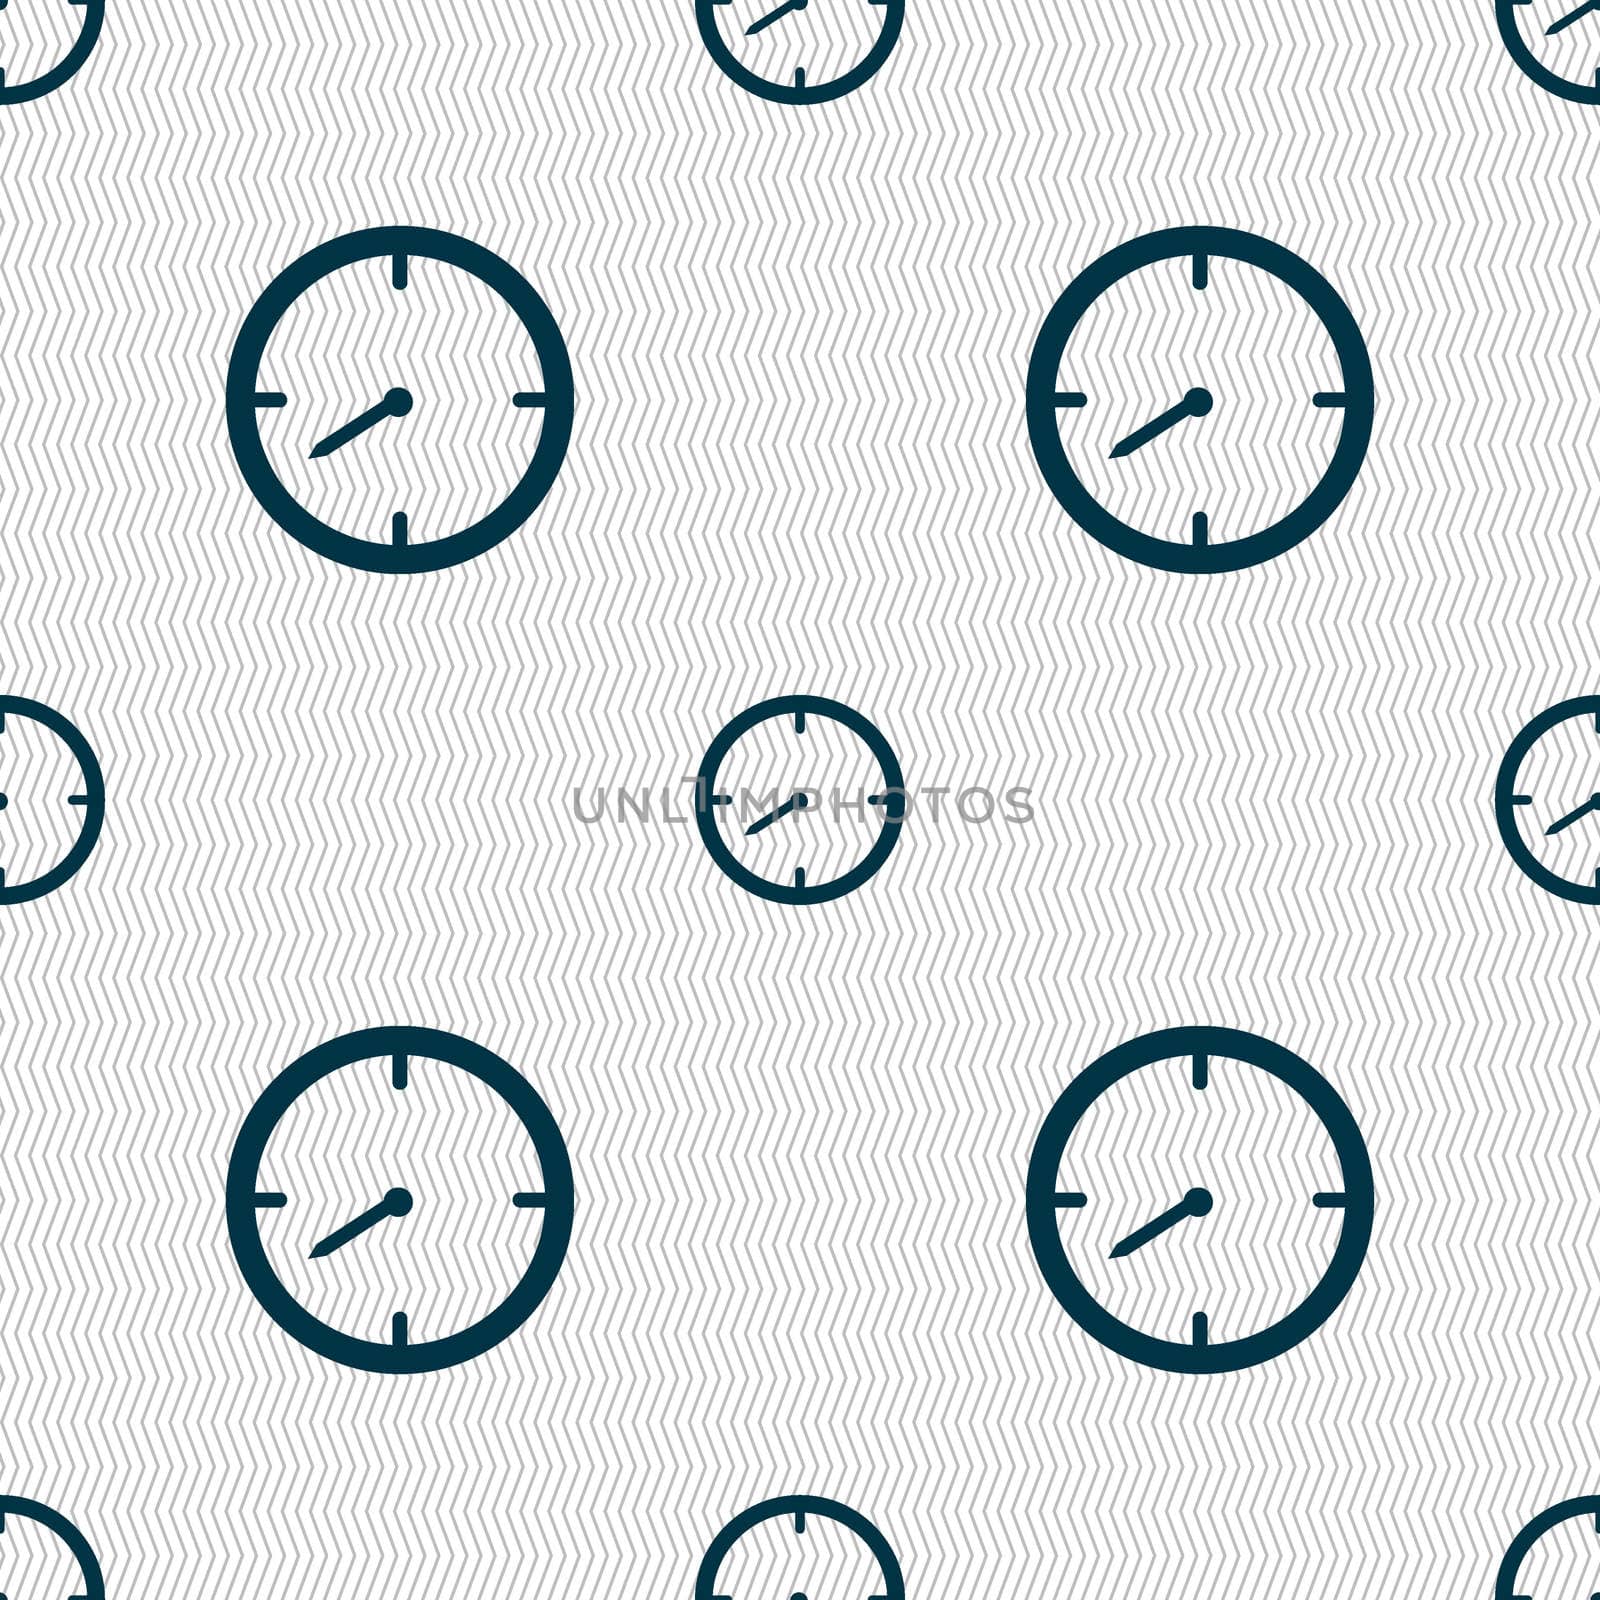 Timer sign icon. Stopwatch symbol.. Seamless abstract background with geometric shapes. illustration